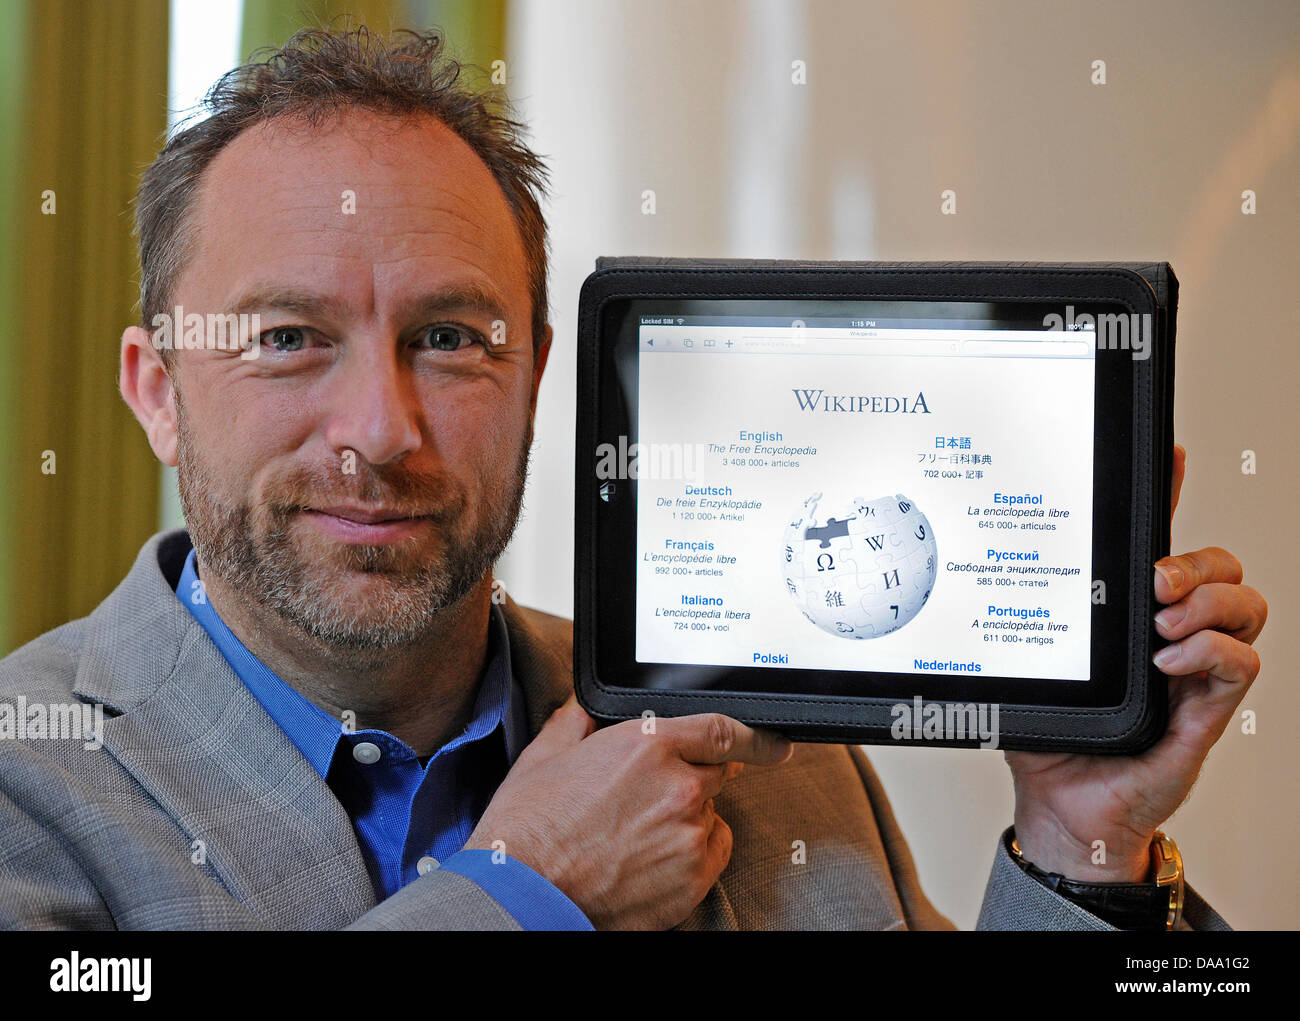 Jimmy Wales, co-founder of the free encyclopedia Wikipedia